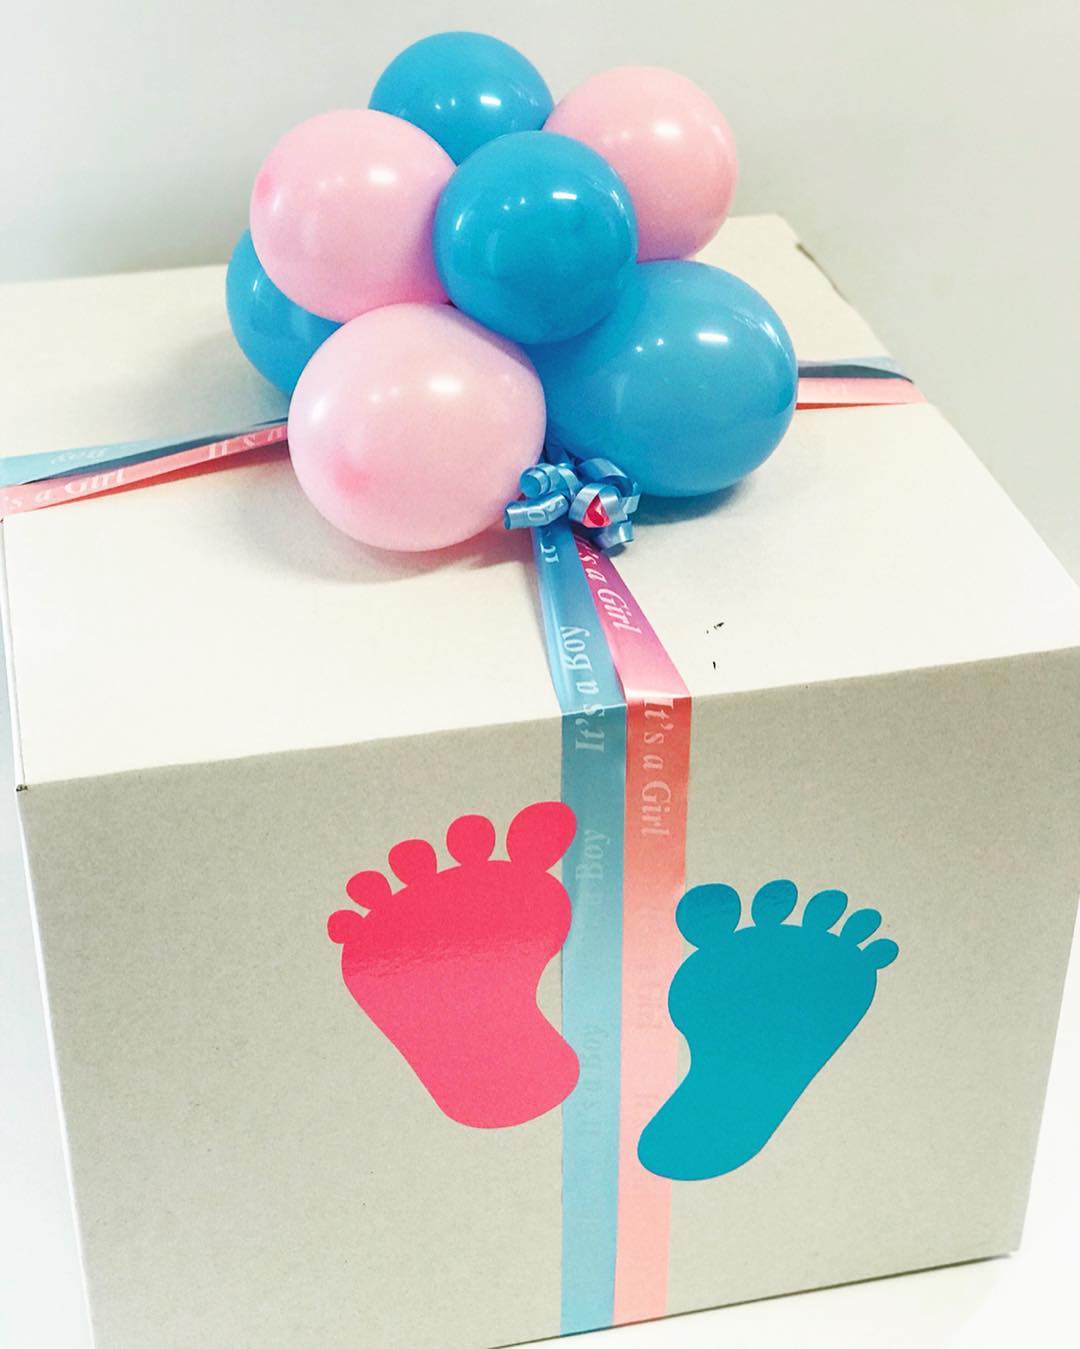 How to plan gender reveal party?